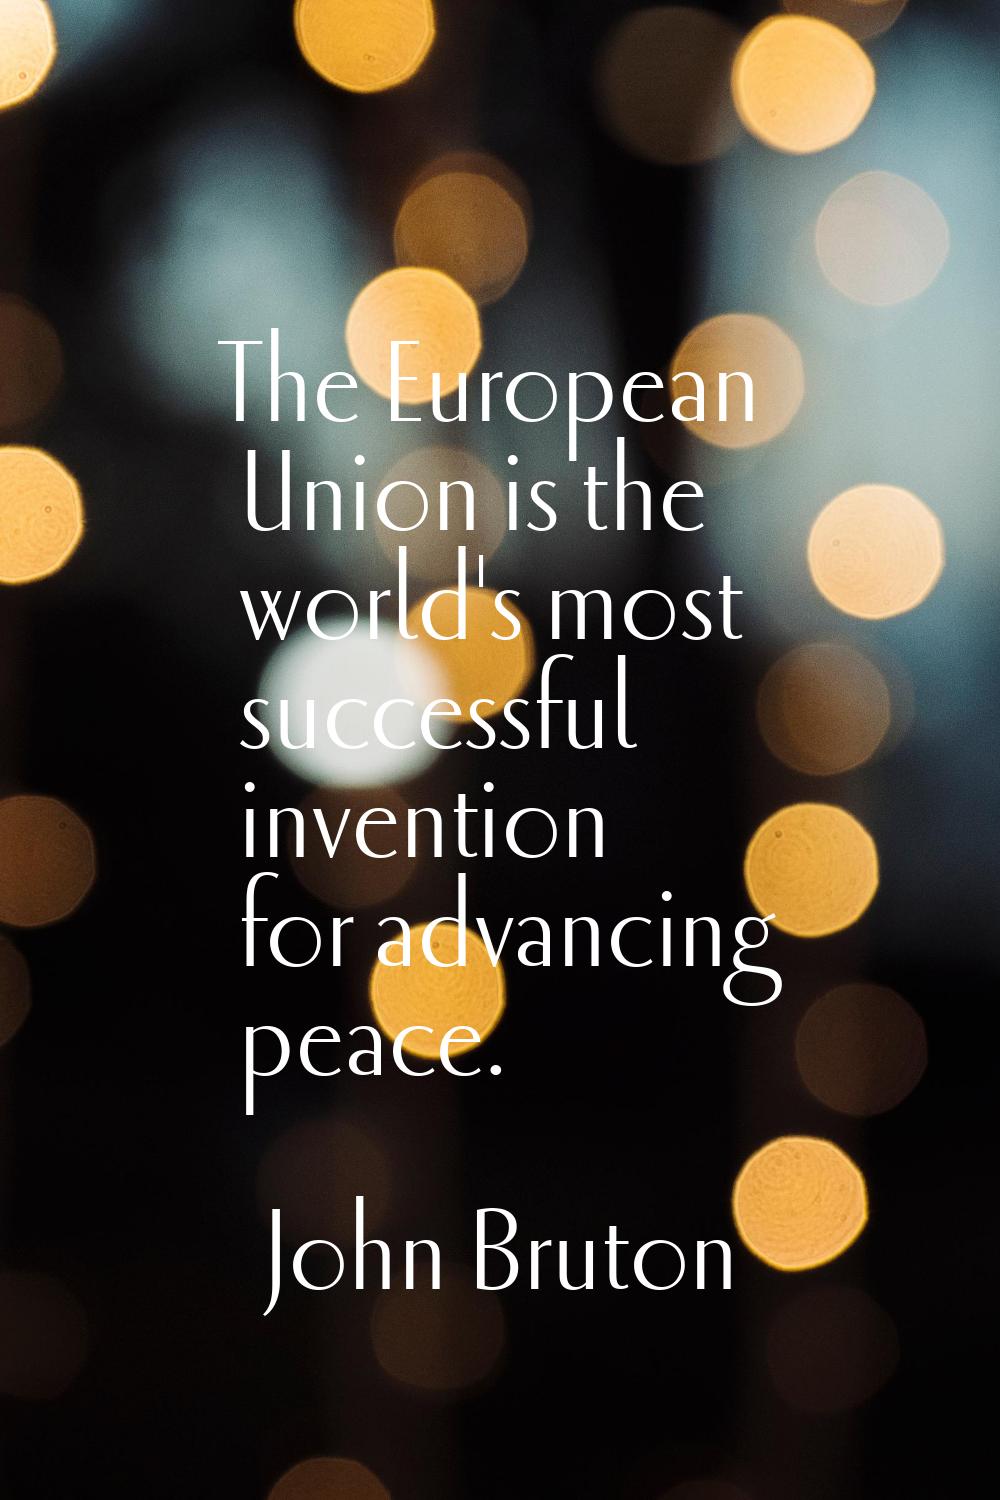 The European Union is the world's most successful invention for advancing peace.